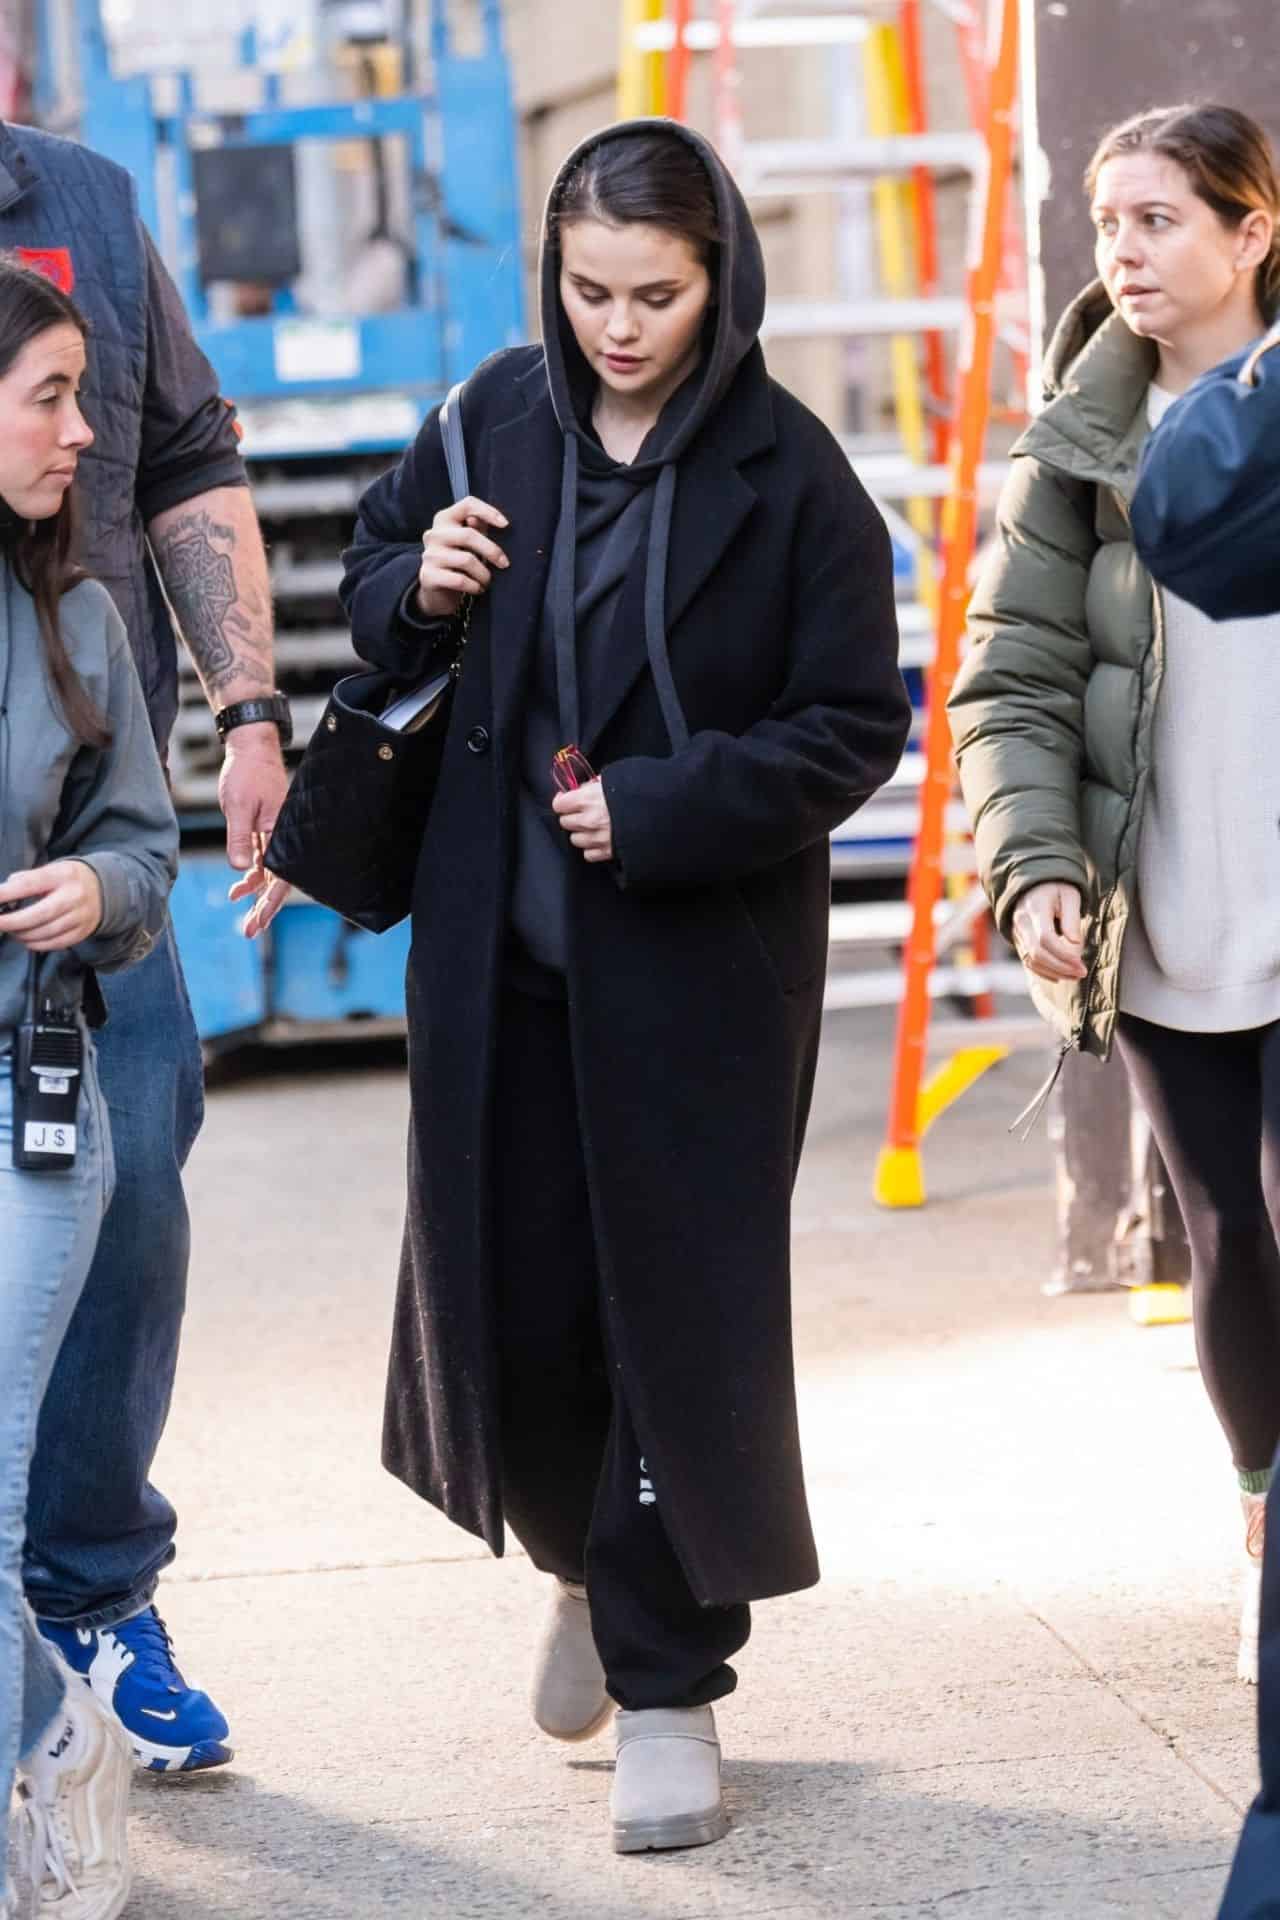 Selena Gomez Amazes in Cozy Winter Outfit on OMITB Set